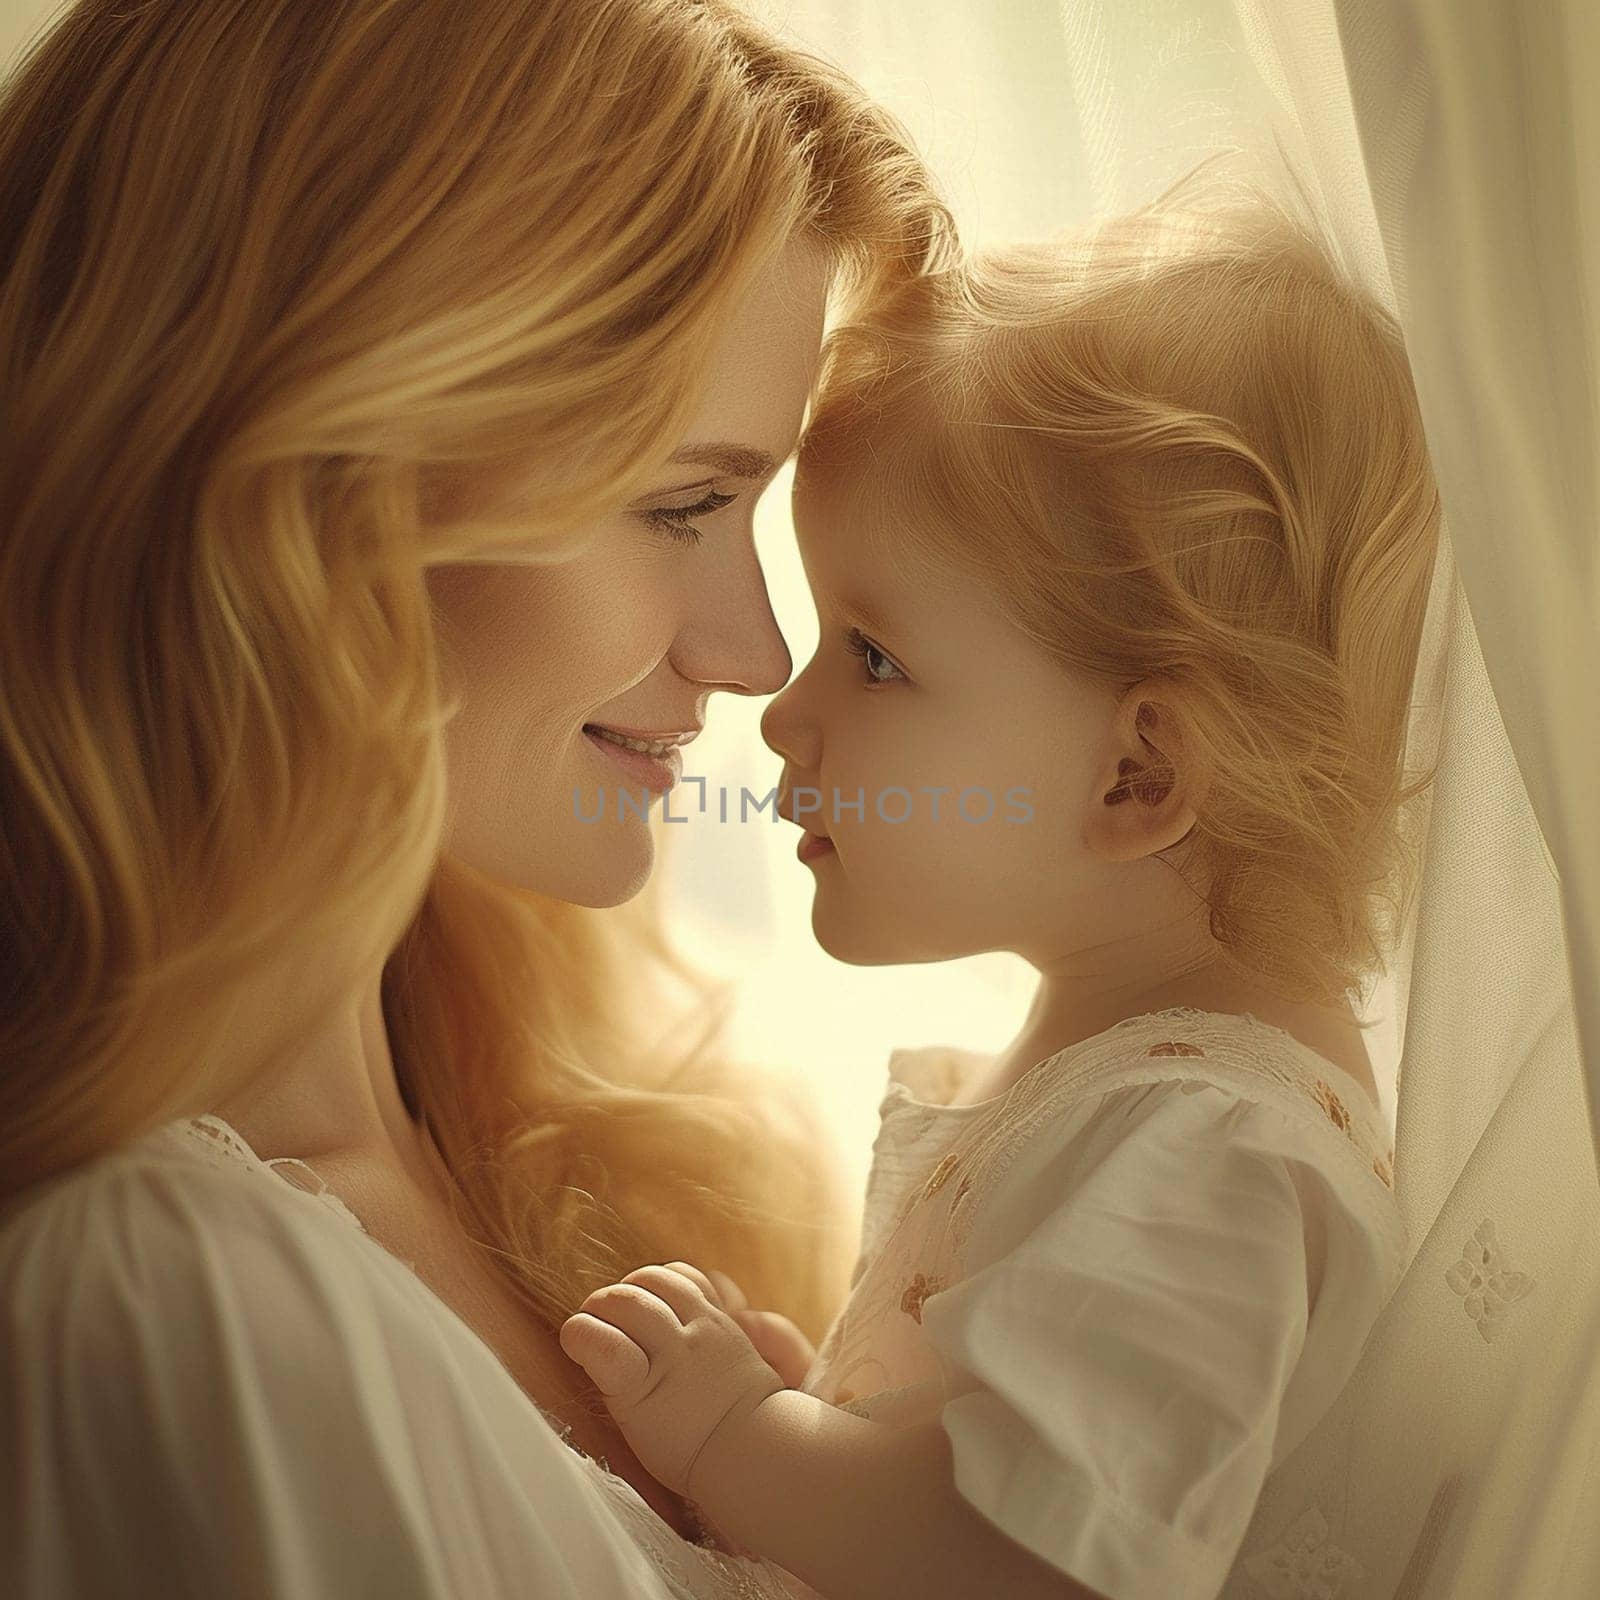 Mom gently hugs her baby. Cute family photo. High quality illustration